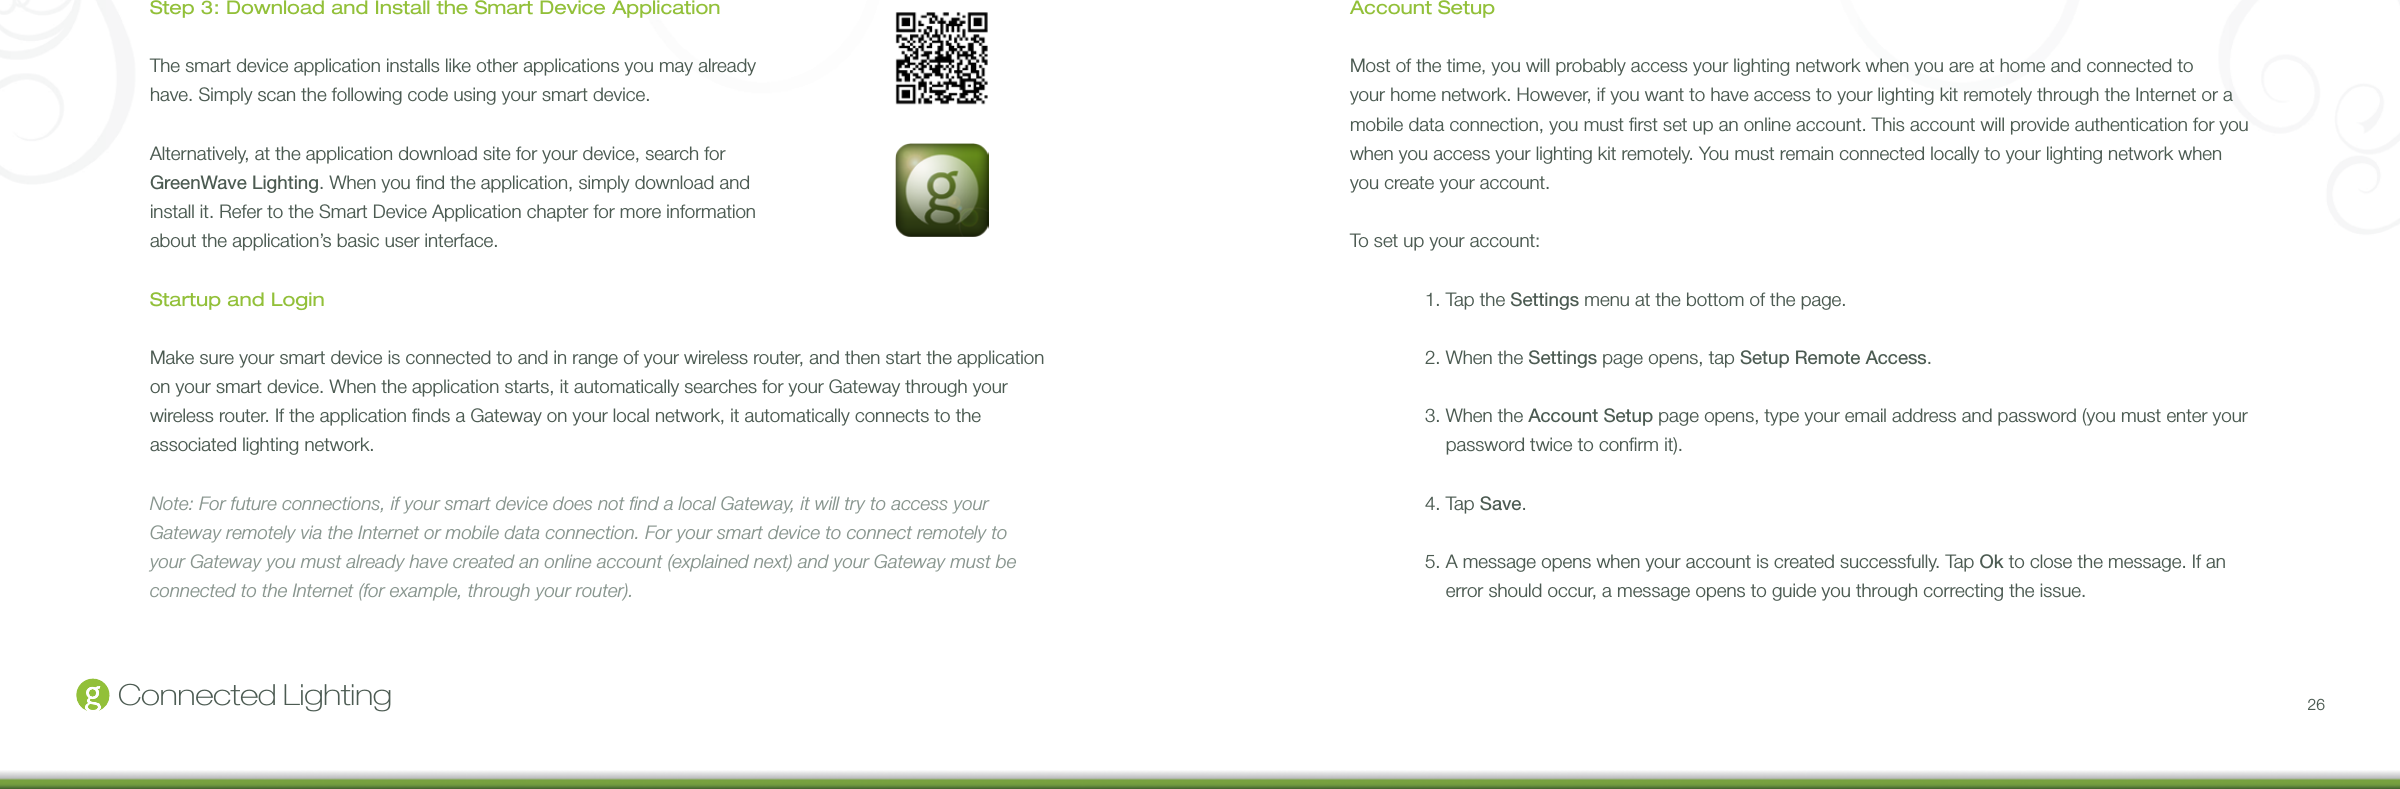 26Connected LightingStep 3: Download and Install the Smart Device ApplicationThe smart device application installs like other applications you may already have. Simply scan the following code using your smart device. Alternatively, at the application download site for your device, search for GreenWave Lighting. When you nd the application, simply download and install it. Refer to the Smart Device Application chapter for more information about the application’s basic user interface.Startup and LoginMake sure your smart device is connected to and in range of your wireless router, and then start the application on your smart device. When the application starts, it automatically searches for your Gateway through your wireless router. If the application nds a Gateway on your local network, it automatically connects to the associated lighting network.Note: For future connections, if your smart device does not nd a local Gateway, it will try to access your Gateway remotely via the Internet or mobile data connection. For your smart device to connect remotely to your Gateway you must already have created an online account (explained next) and your Gateway must be connected to the Internet (for example, through your router).Account SetupMost of the time, you will probably access your lighting network when you are at home and connected to your home network. However, if you want to have access to your lighting kit remotely through the Internet or a mobile data connection, you must rst set up an online account. This account will provide authentication for you when you access your lighting kit remotely. You must remain connected locally to your lighting network when you create your account.To set up your account:  1. Tap the Settings menu at the bottom of the page.  2. When the Settings page opens, tap Setup Remote Access.  3.  When the Account Setup page opens, type your email address and password (you must enter your password twice to conrm it).  4. Tap Save.  5.  A message opens when your account is created successfully. Tap Ok to close the message. If an error should occur, a message opens to guide you through correcting the issue.